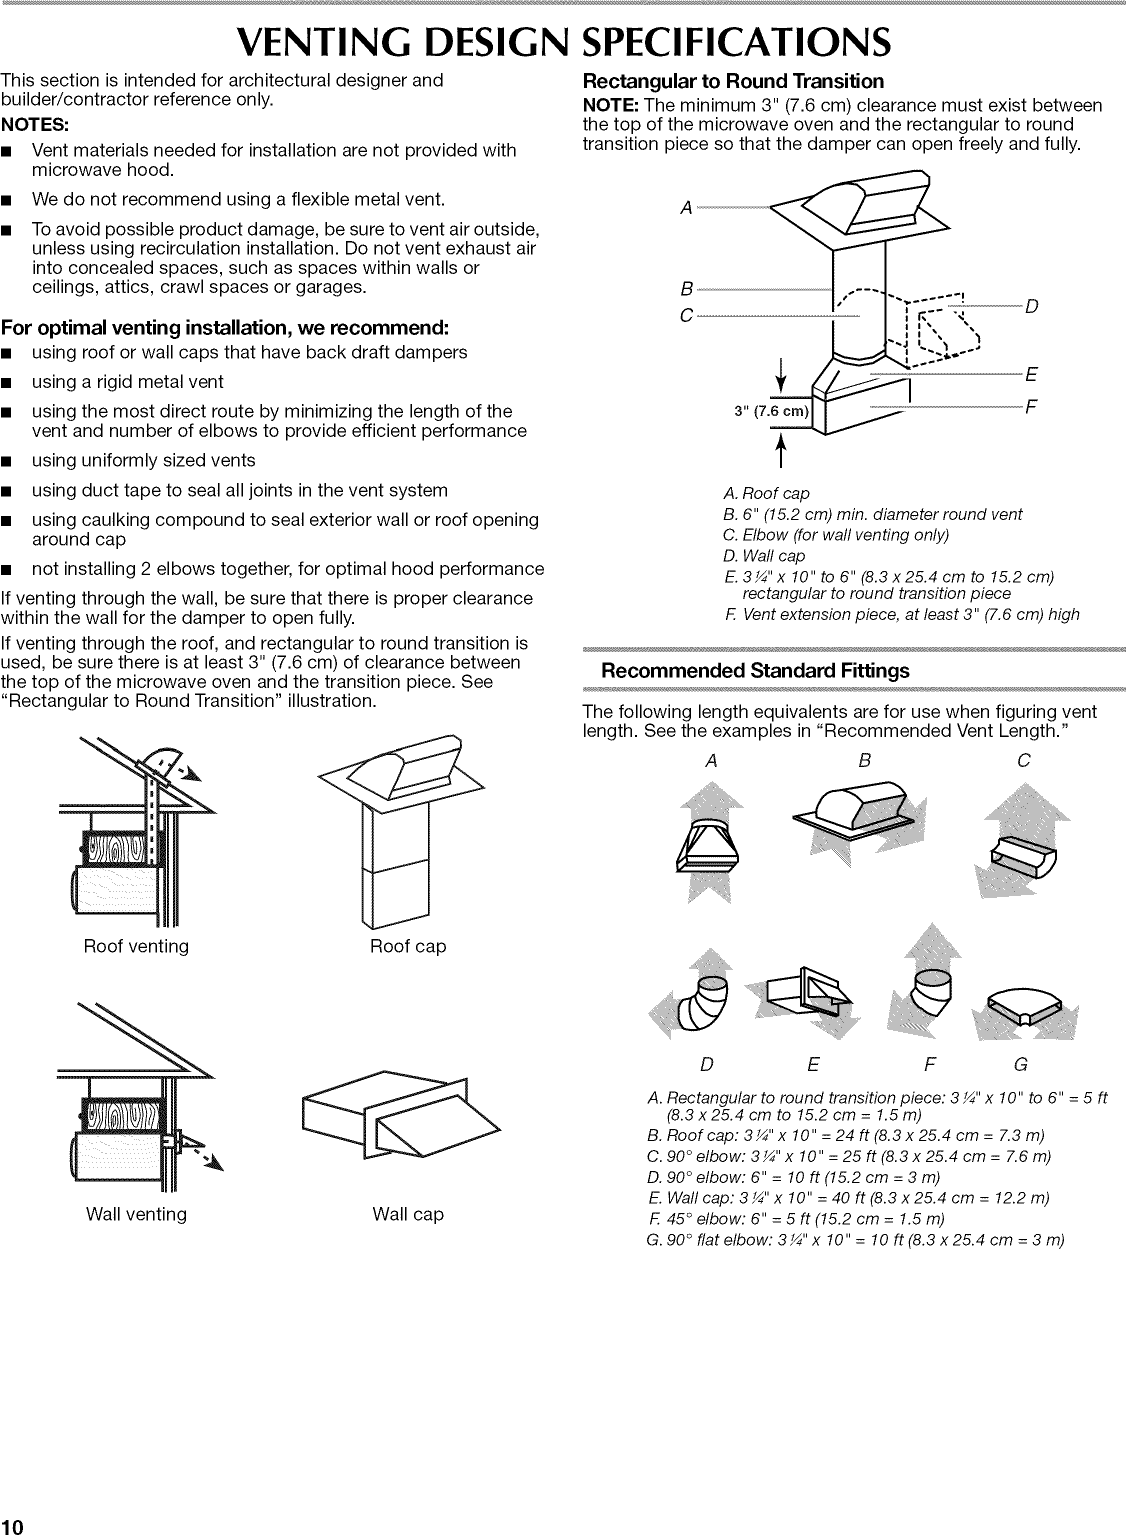 Page 10 of 12 - Jenn-Air JMV8208DB00 User Manual  MICROWAVE OVEN/HOOD 2.0 CU. FT. - Manuals And Guides L0906188